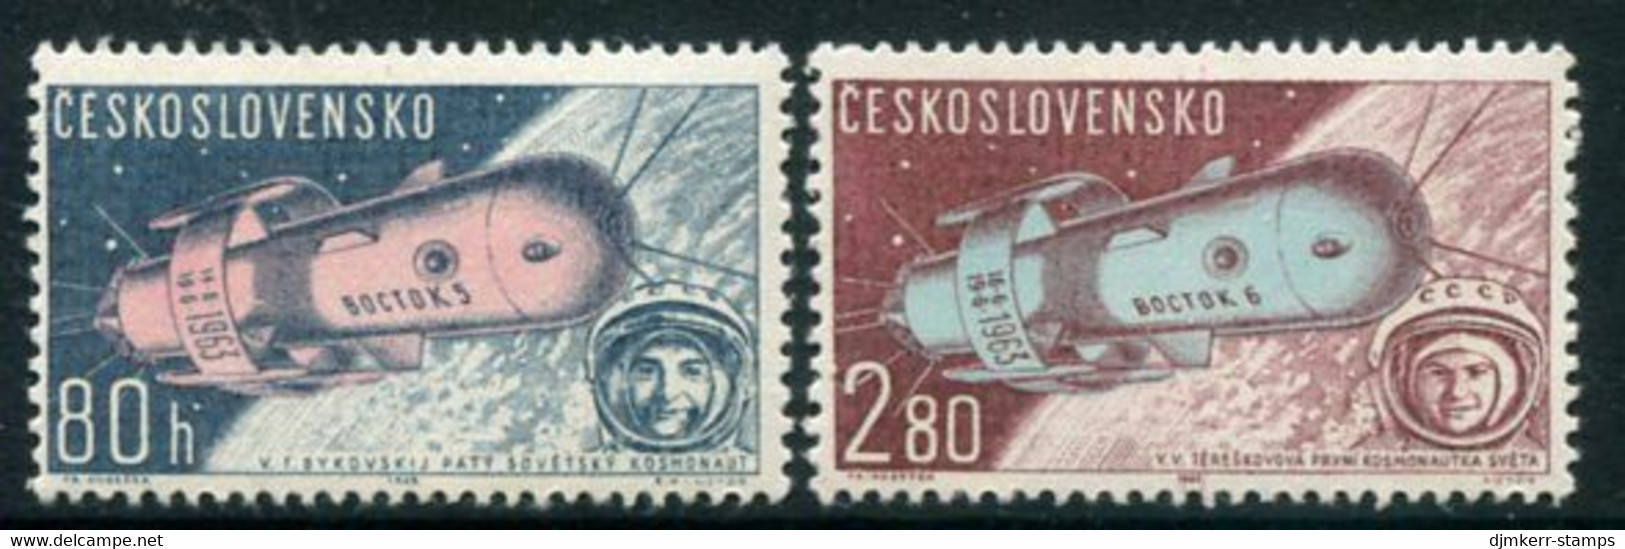 CZECHOSLOVAKIA 1963 Vostok 5 And 6 Space Flights MNH / **.  Michel 1413-14 - Unused Stamps